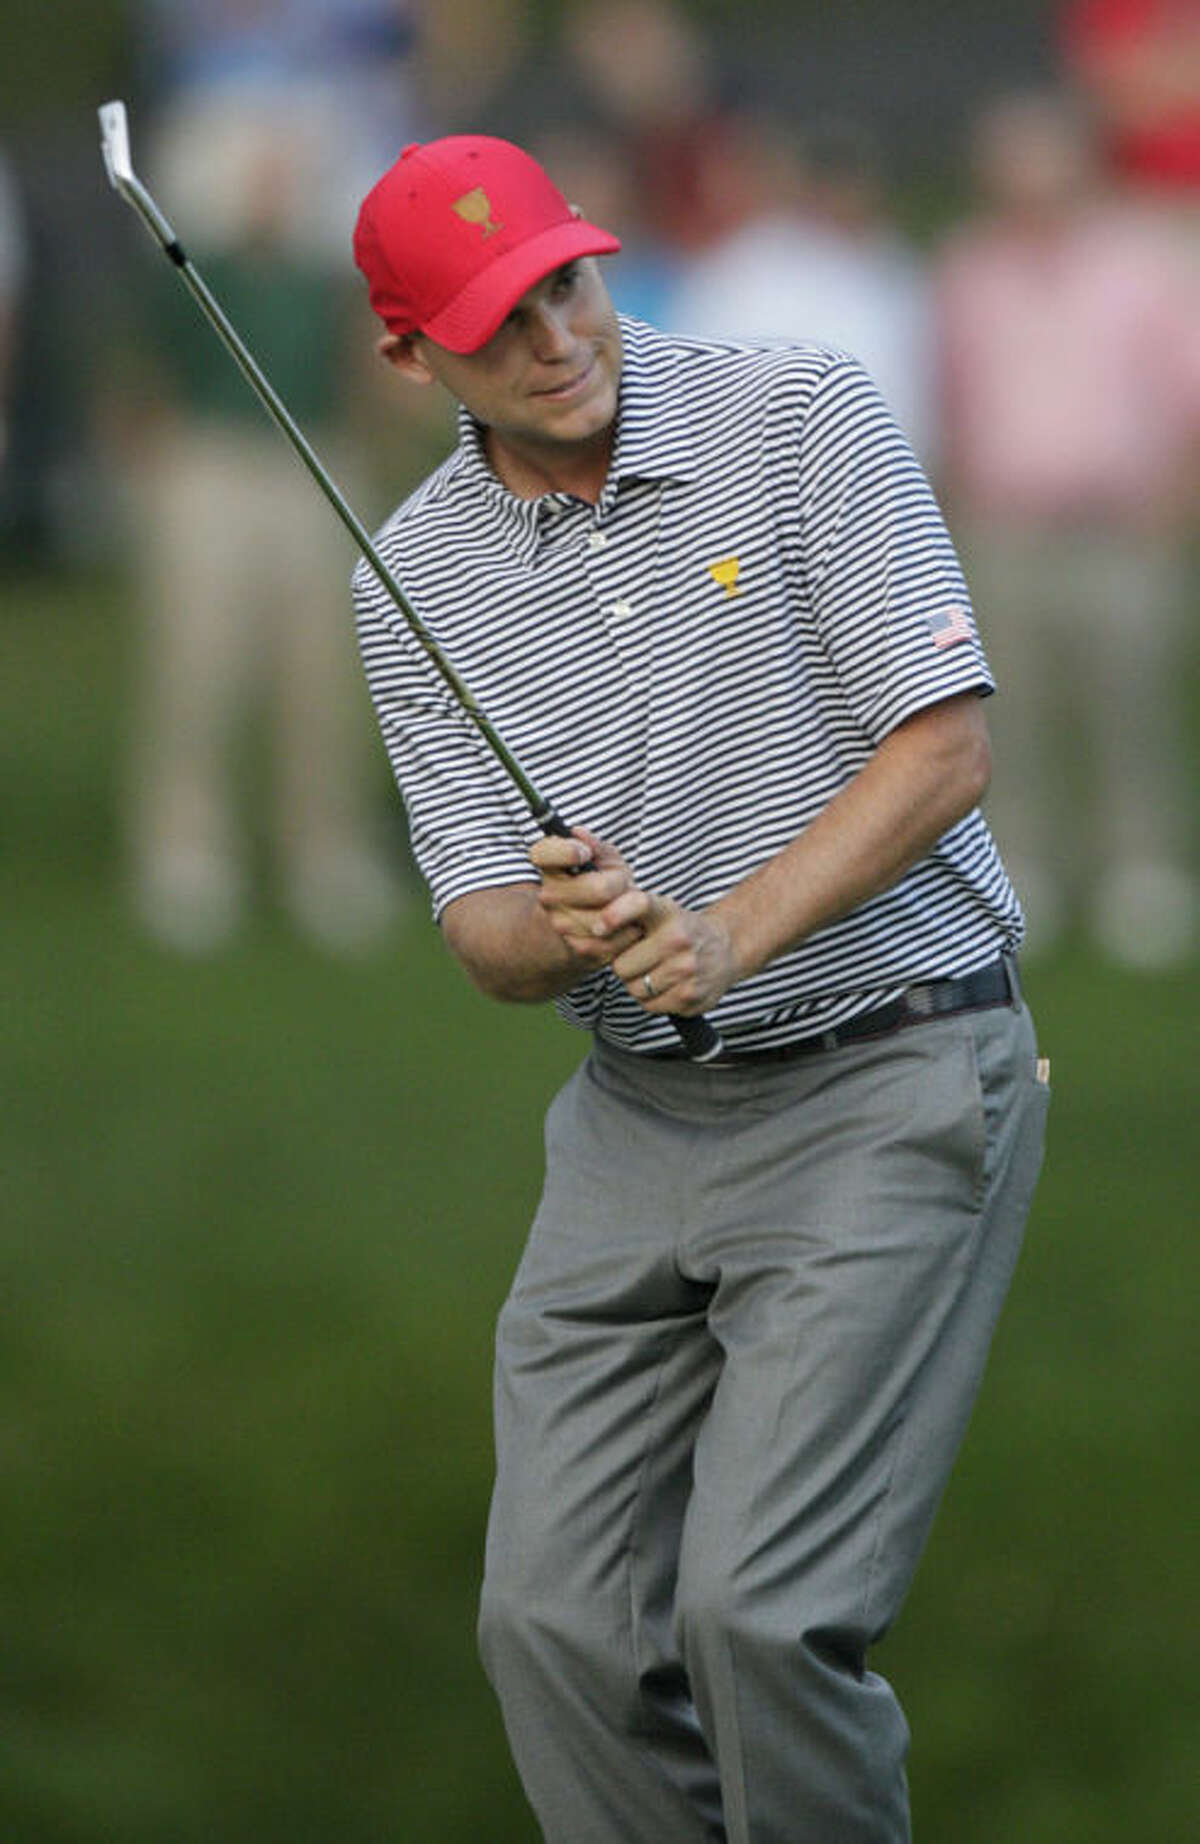 United States's Bill Haas reacts to missing a shot on the 15th hole during a foursome match at the Presidents Cup golf tournament at Muirfield Village Golf Club Friday, Oct. 4, 2013, in Dublin, Ohio. (AP Photo/Jay LaPrete)